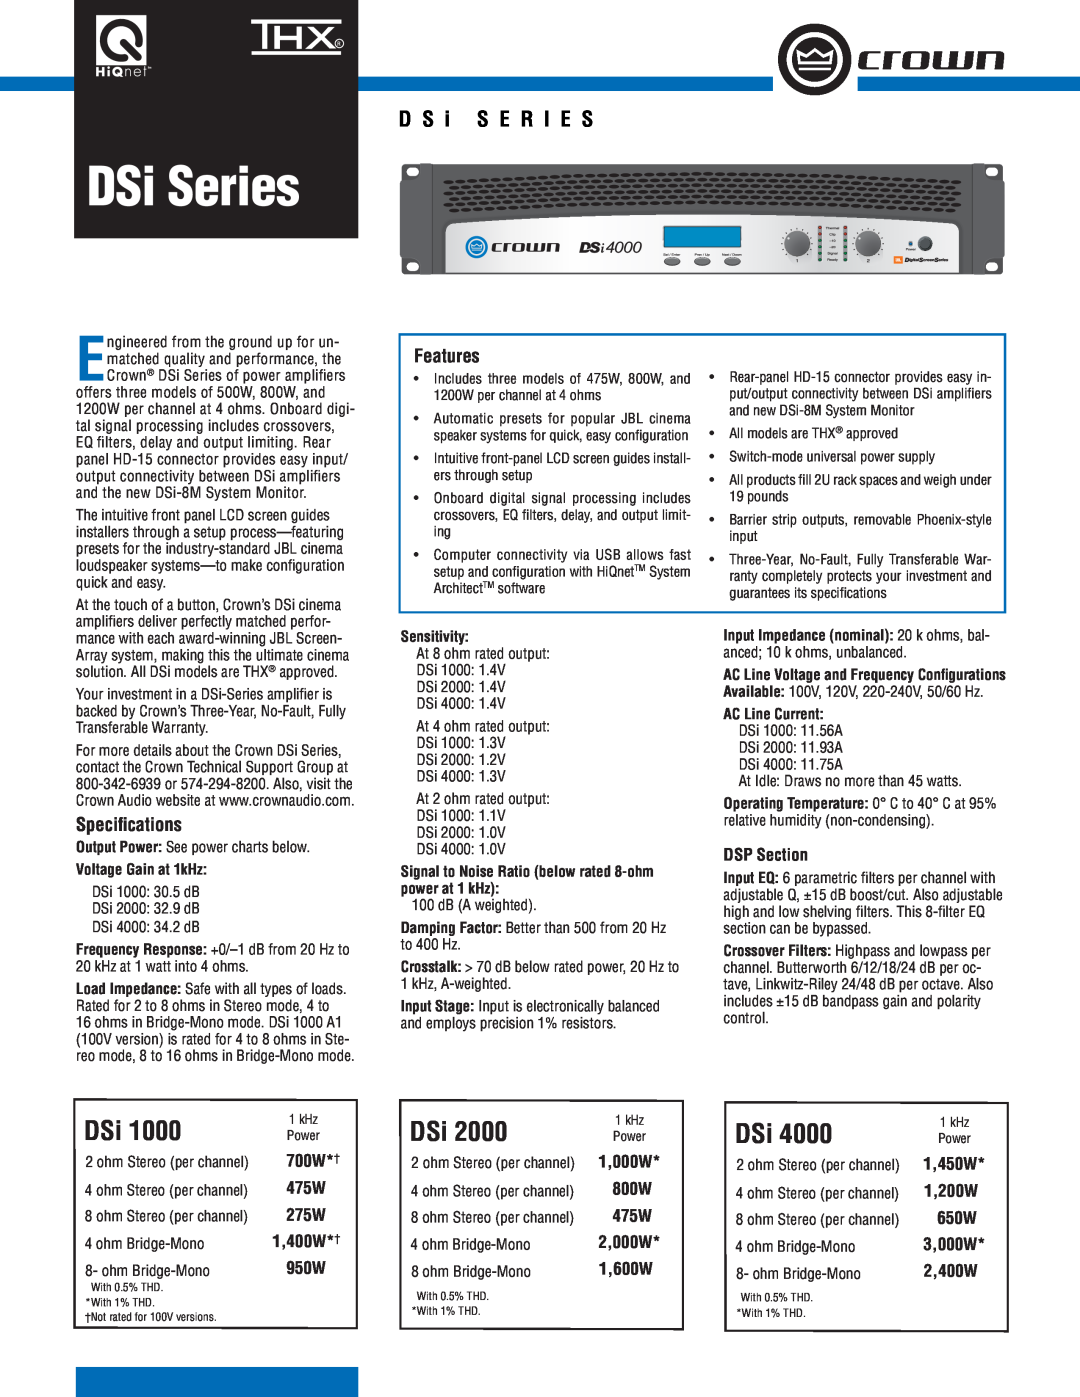 Crown Audio DSi Series specifications Features, Speciﬁcations, DSP Section, 700W*† 475W 275W 1,400W*† 950W 